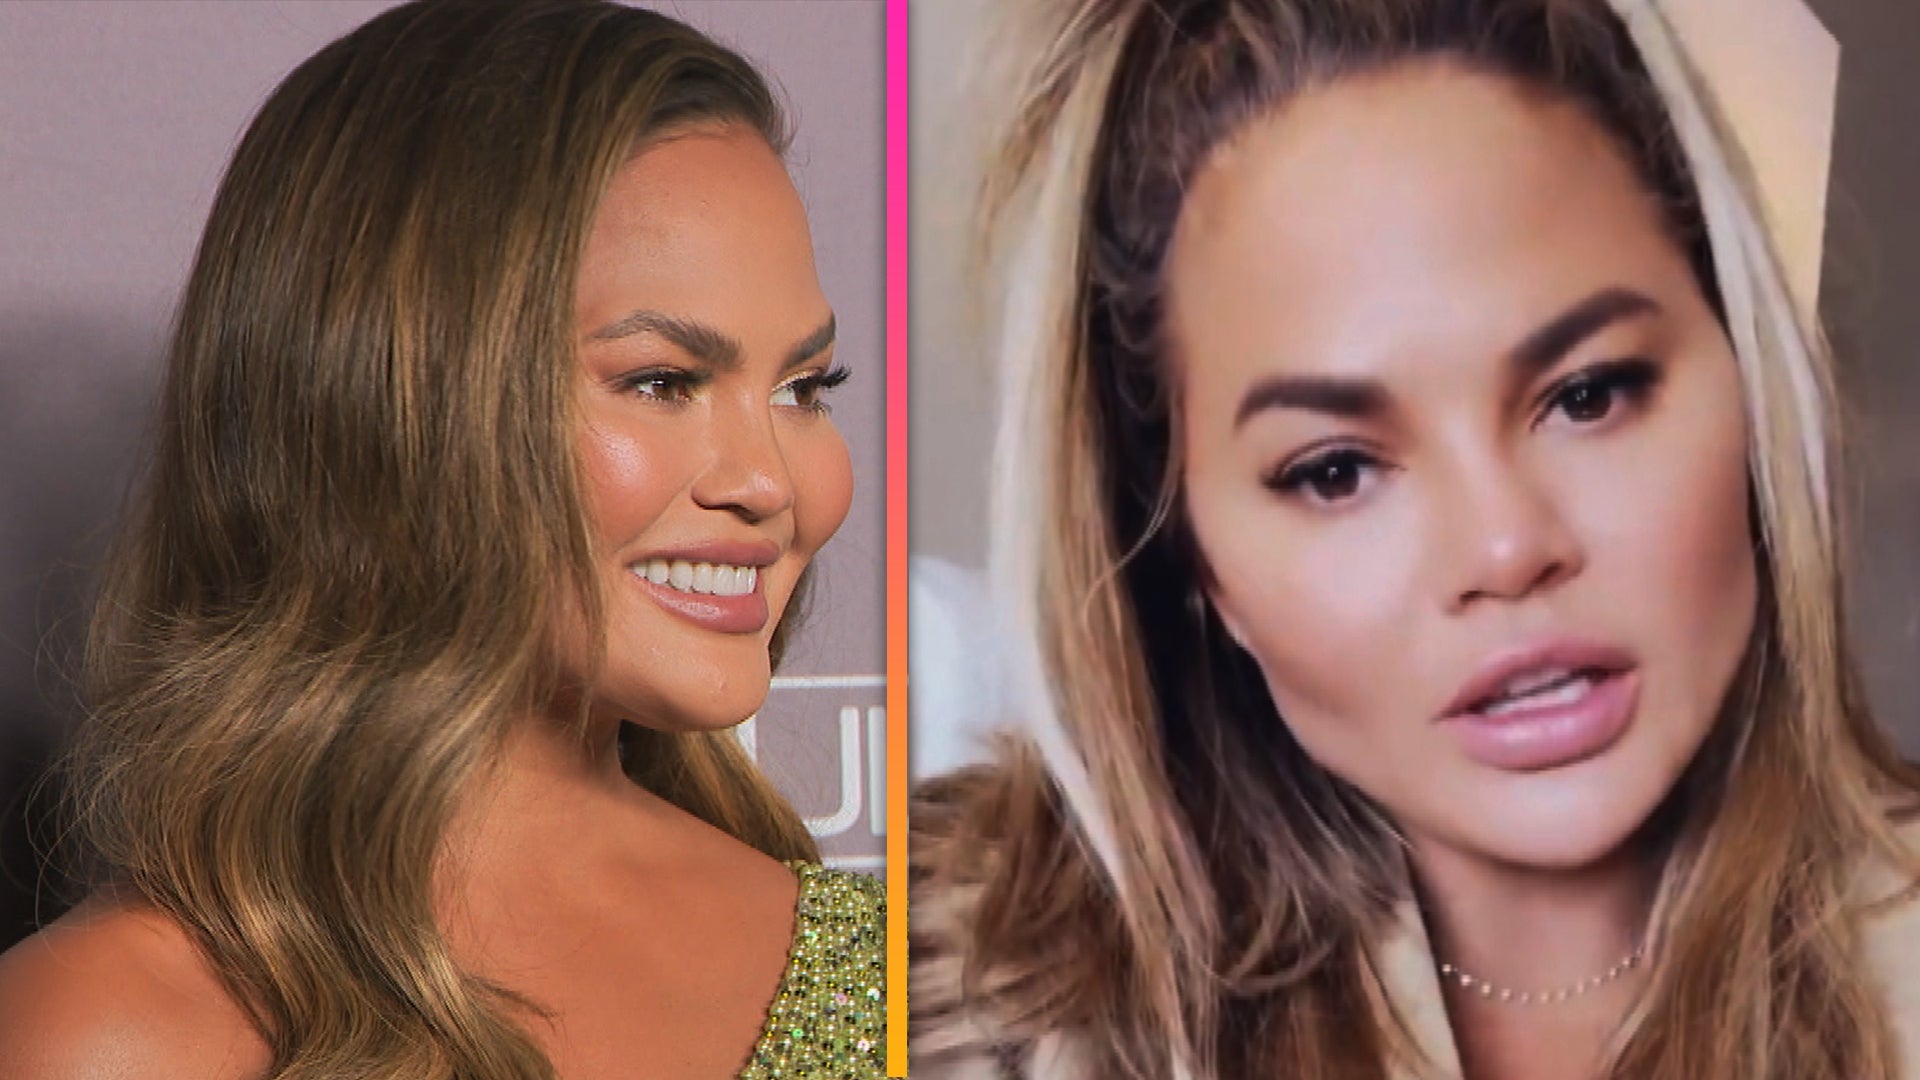 Chrissy Teigen Look Like Before and After Plastic Surgery?